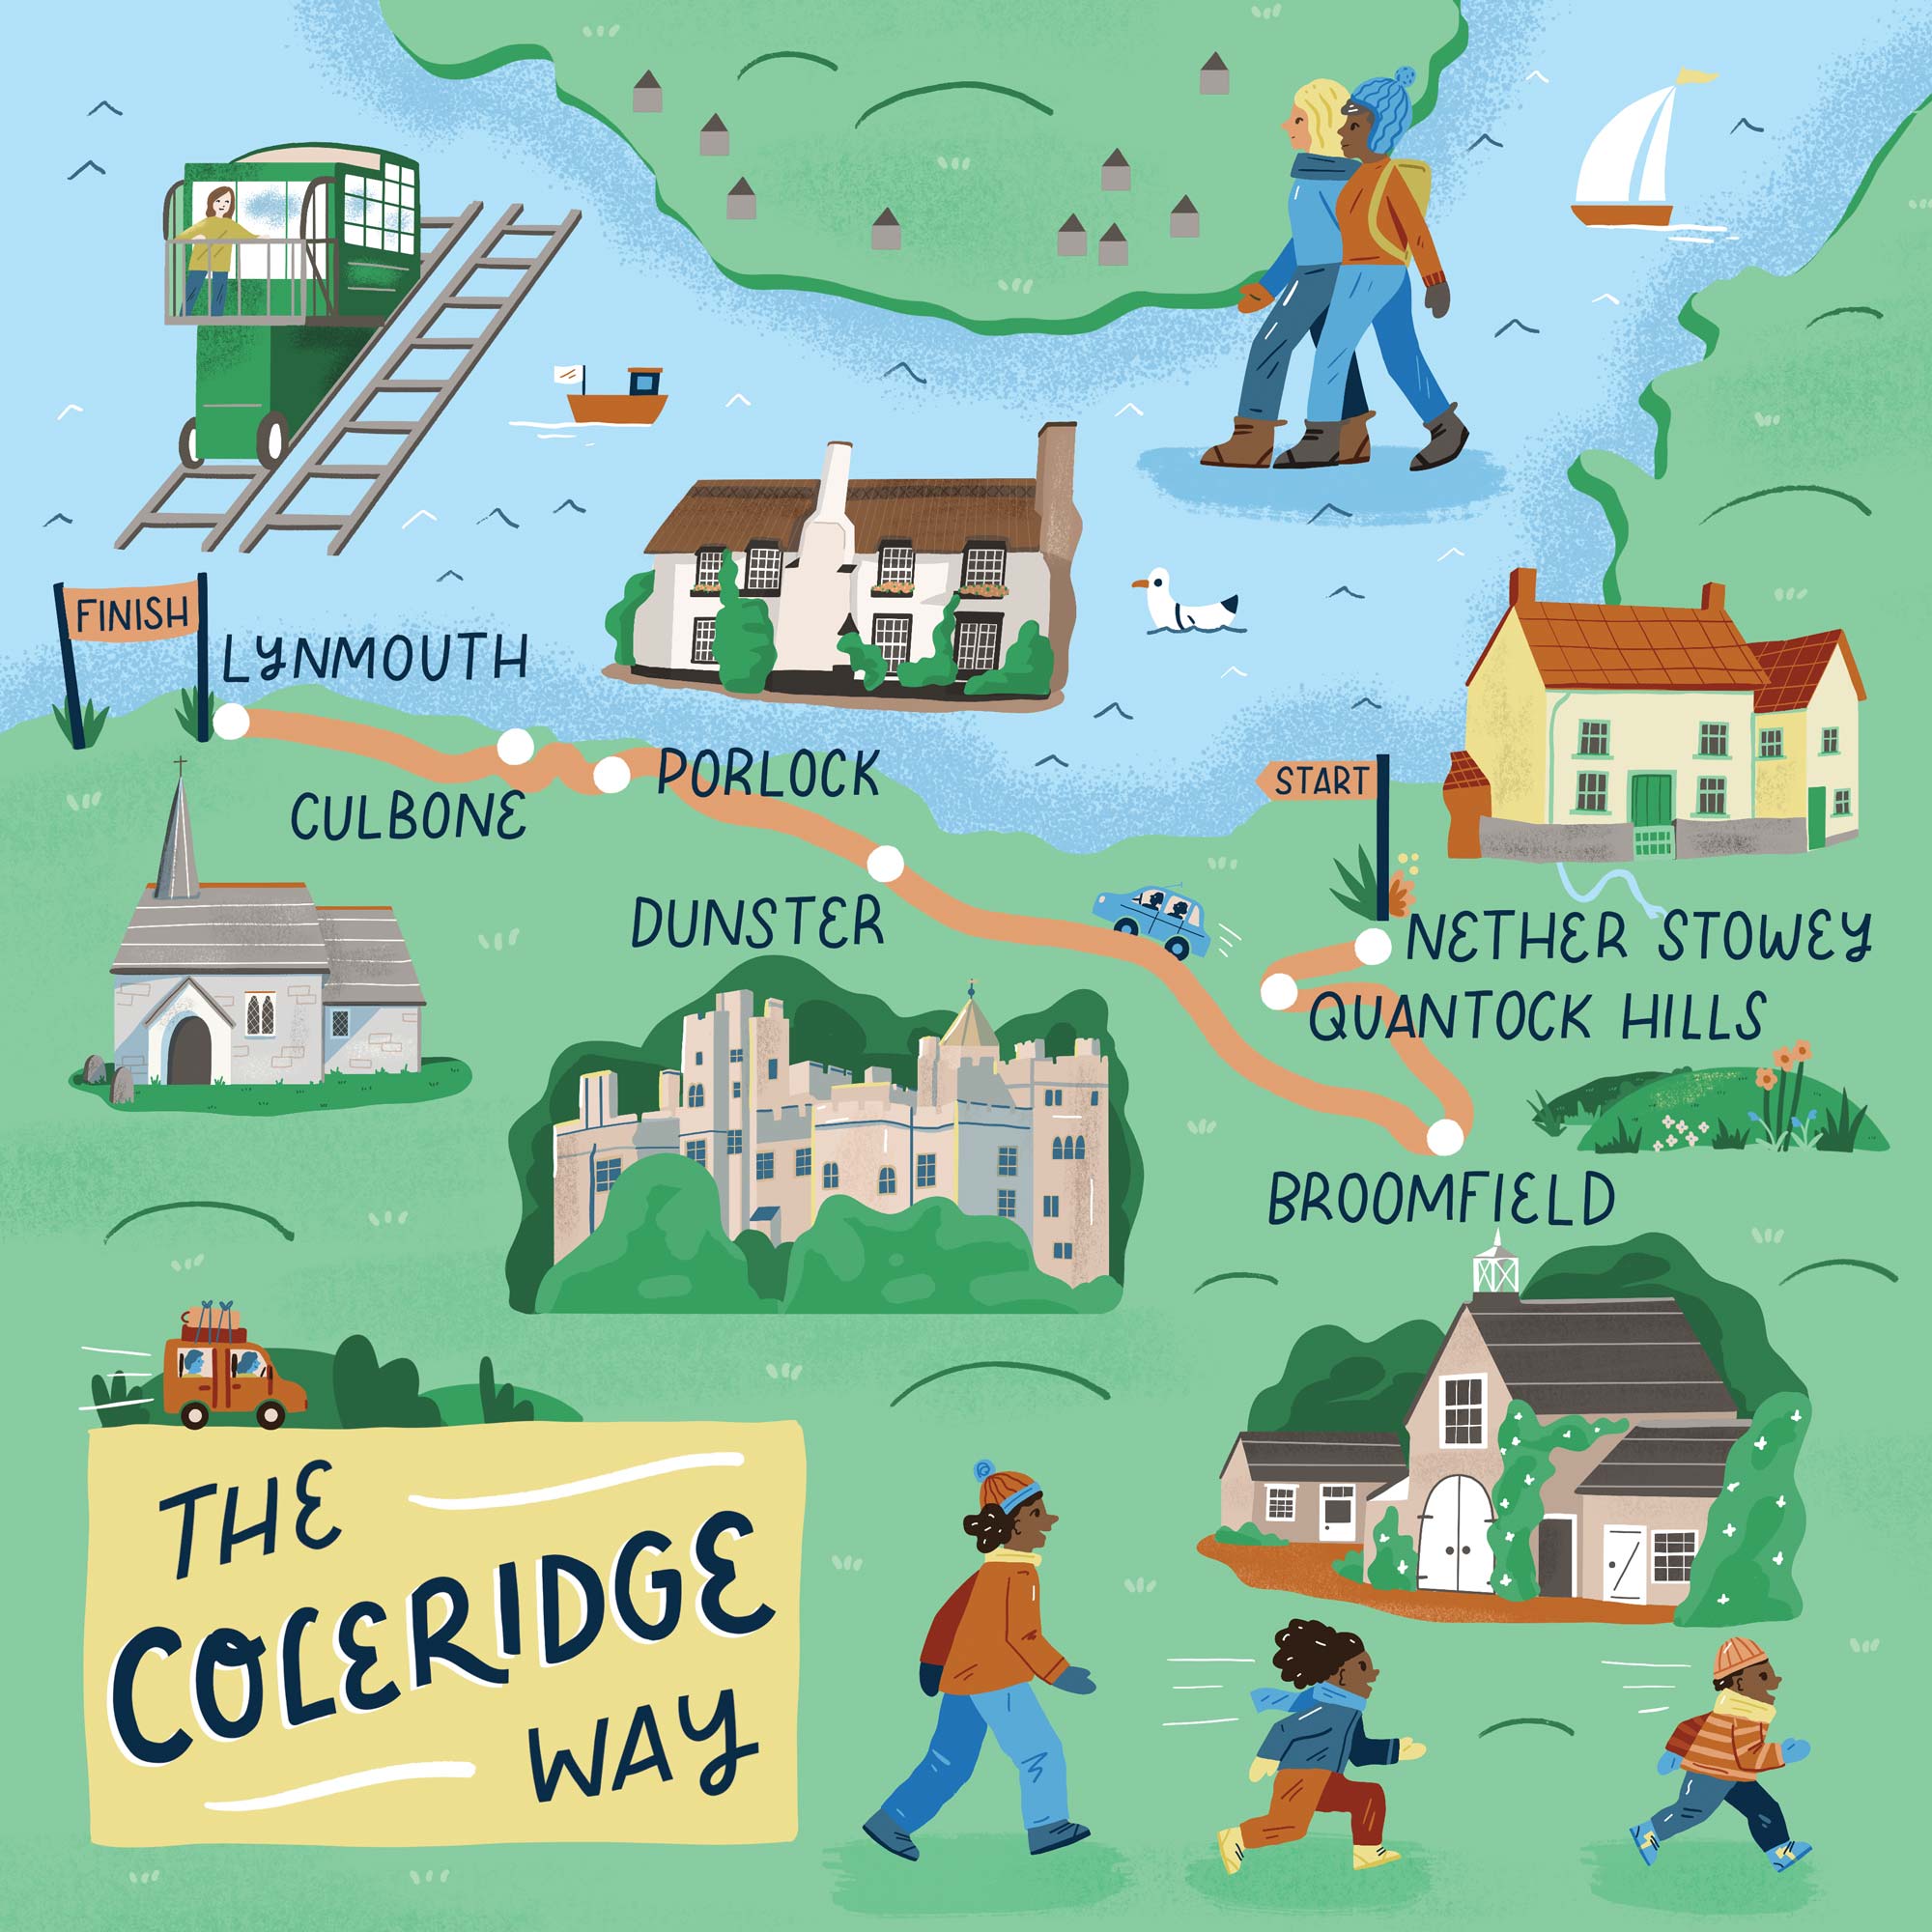 Coleridge Way Map for Discover Britain by Elly Jahnz